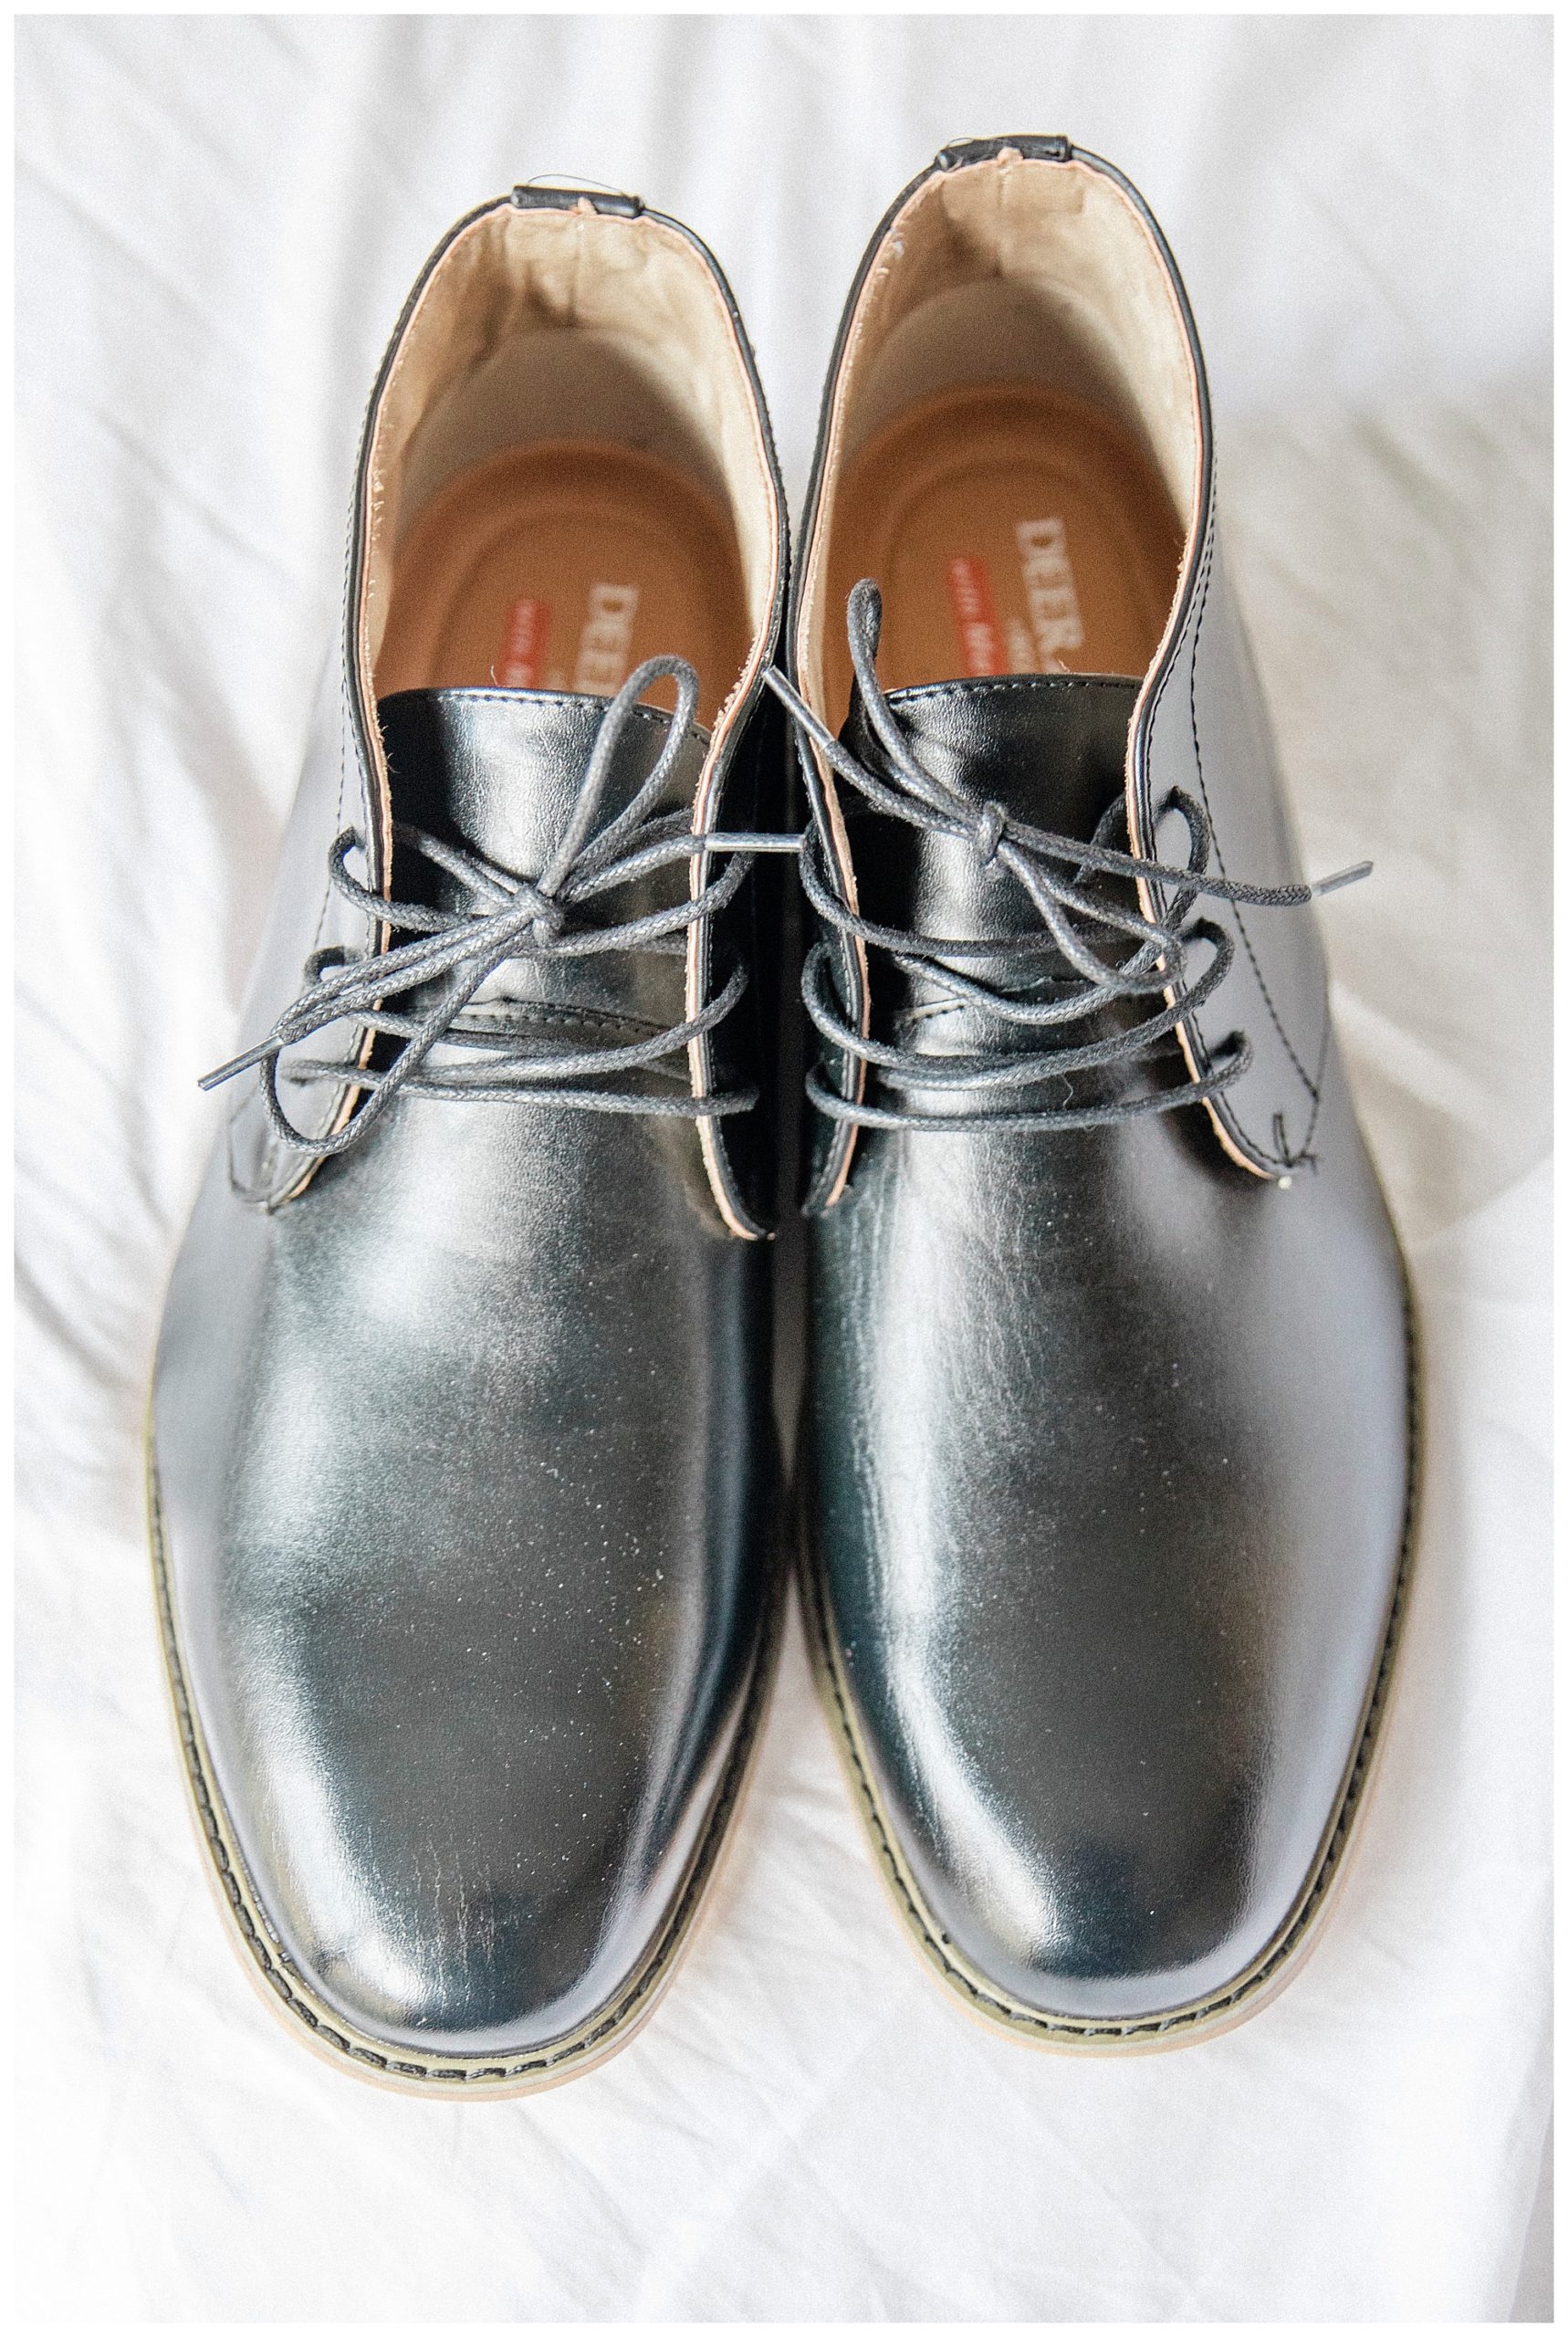 Groom's Shoes for a Minneapolis wedding.